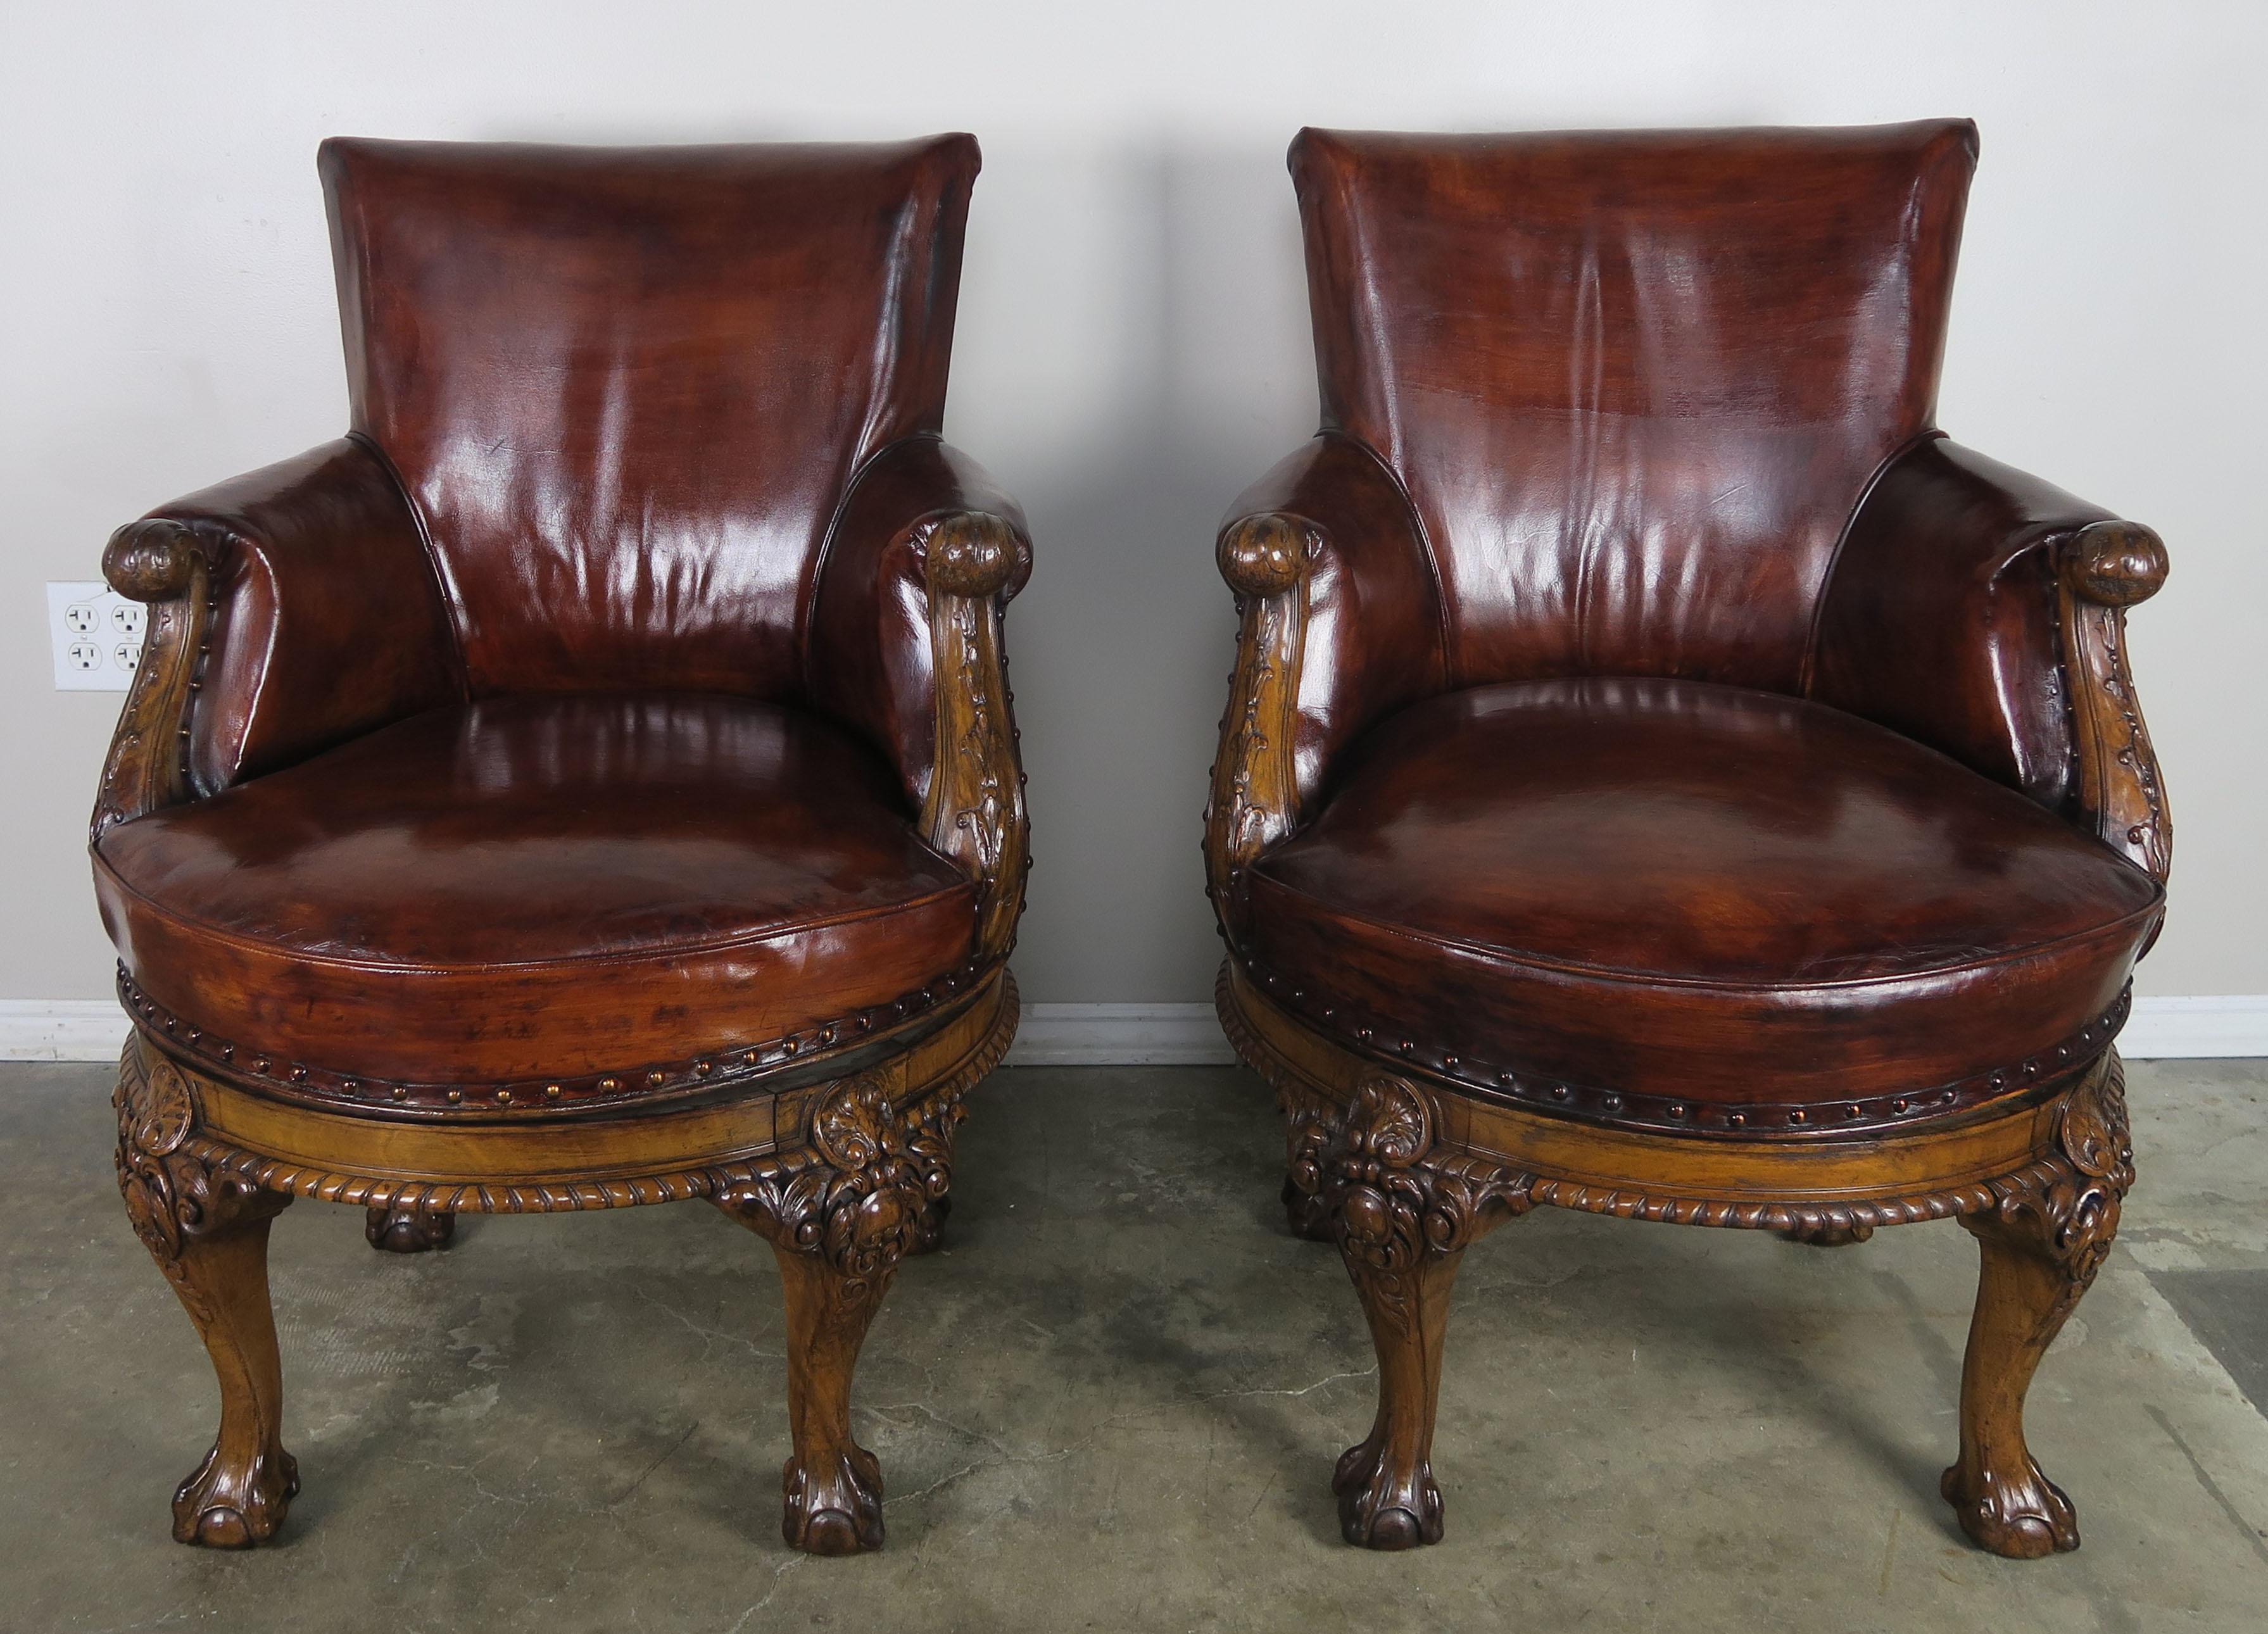 Pair of English George II style walnut swivel library chairs upholstered in original rich cognac colored leather with leather gimp and spaced nailhead trim detail. The chairs stand on four beautifully carved legs ending in ball and claw